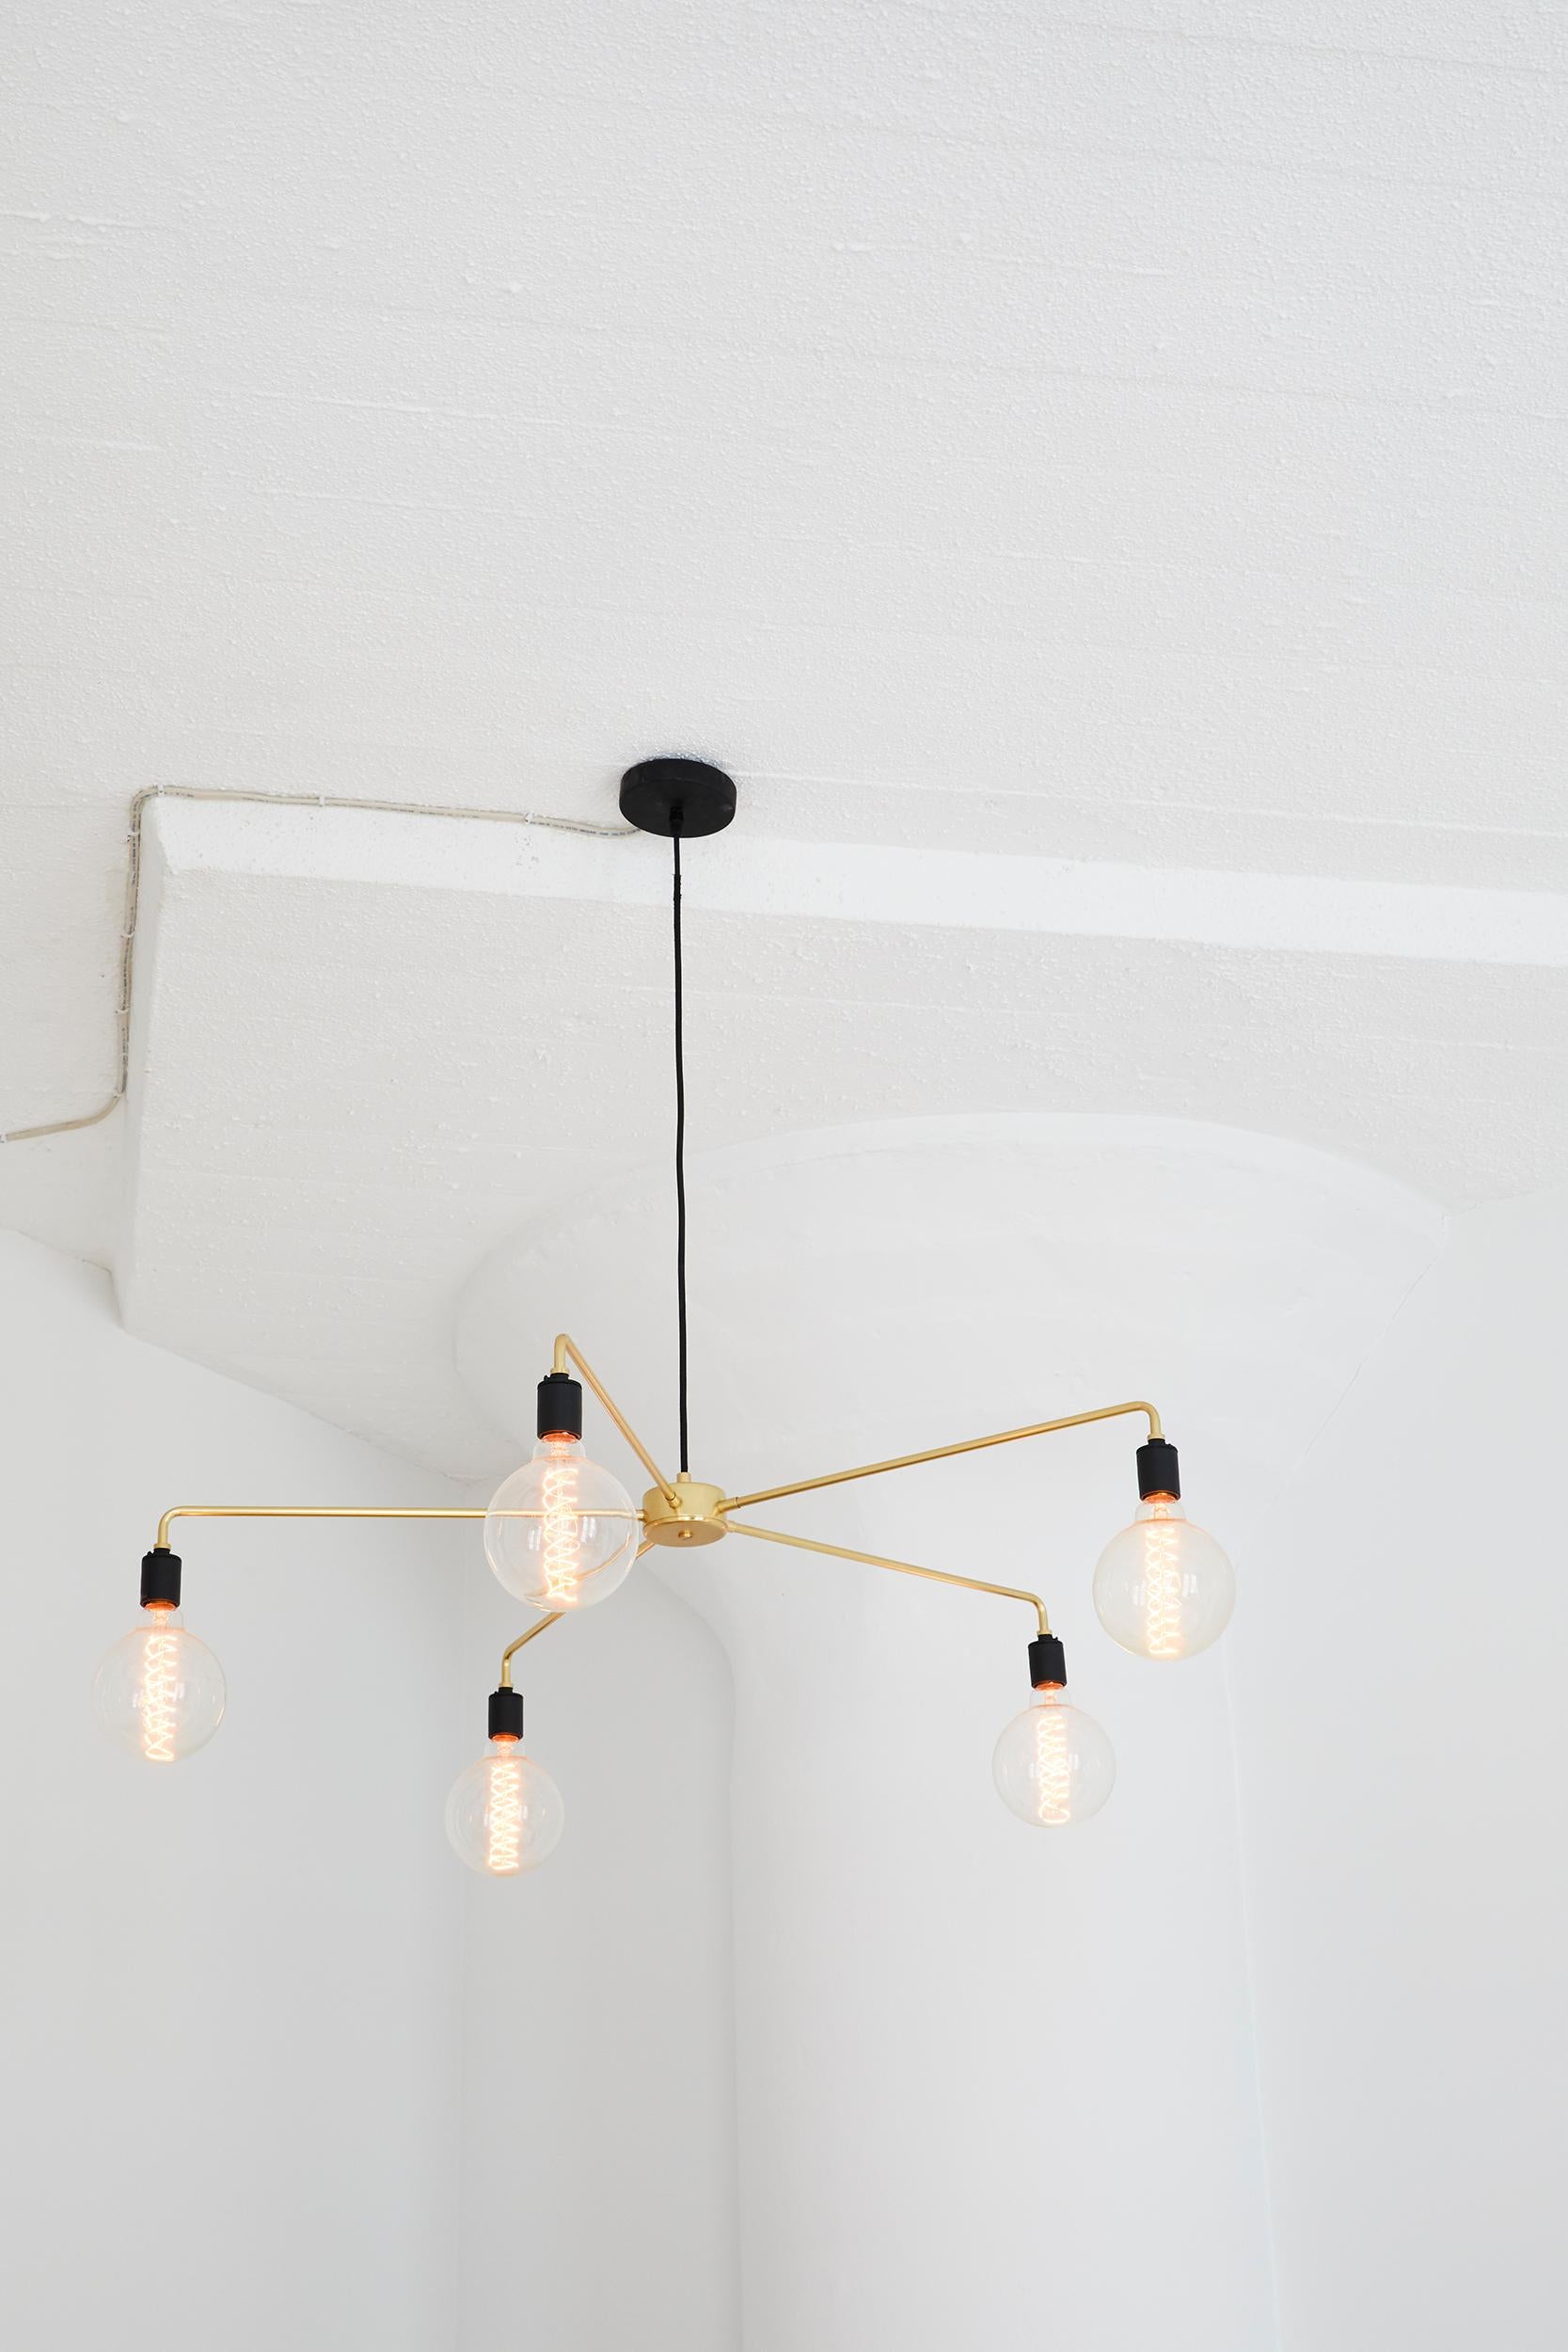 Chinese Tribeca Chambers Chandelier by Søren Rose, Metal Lighting in Brass